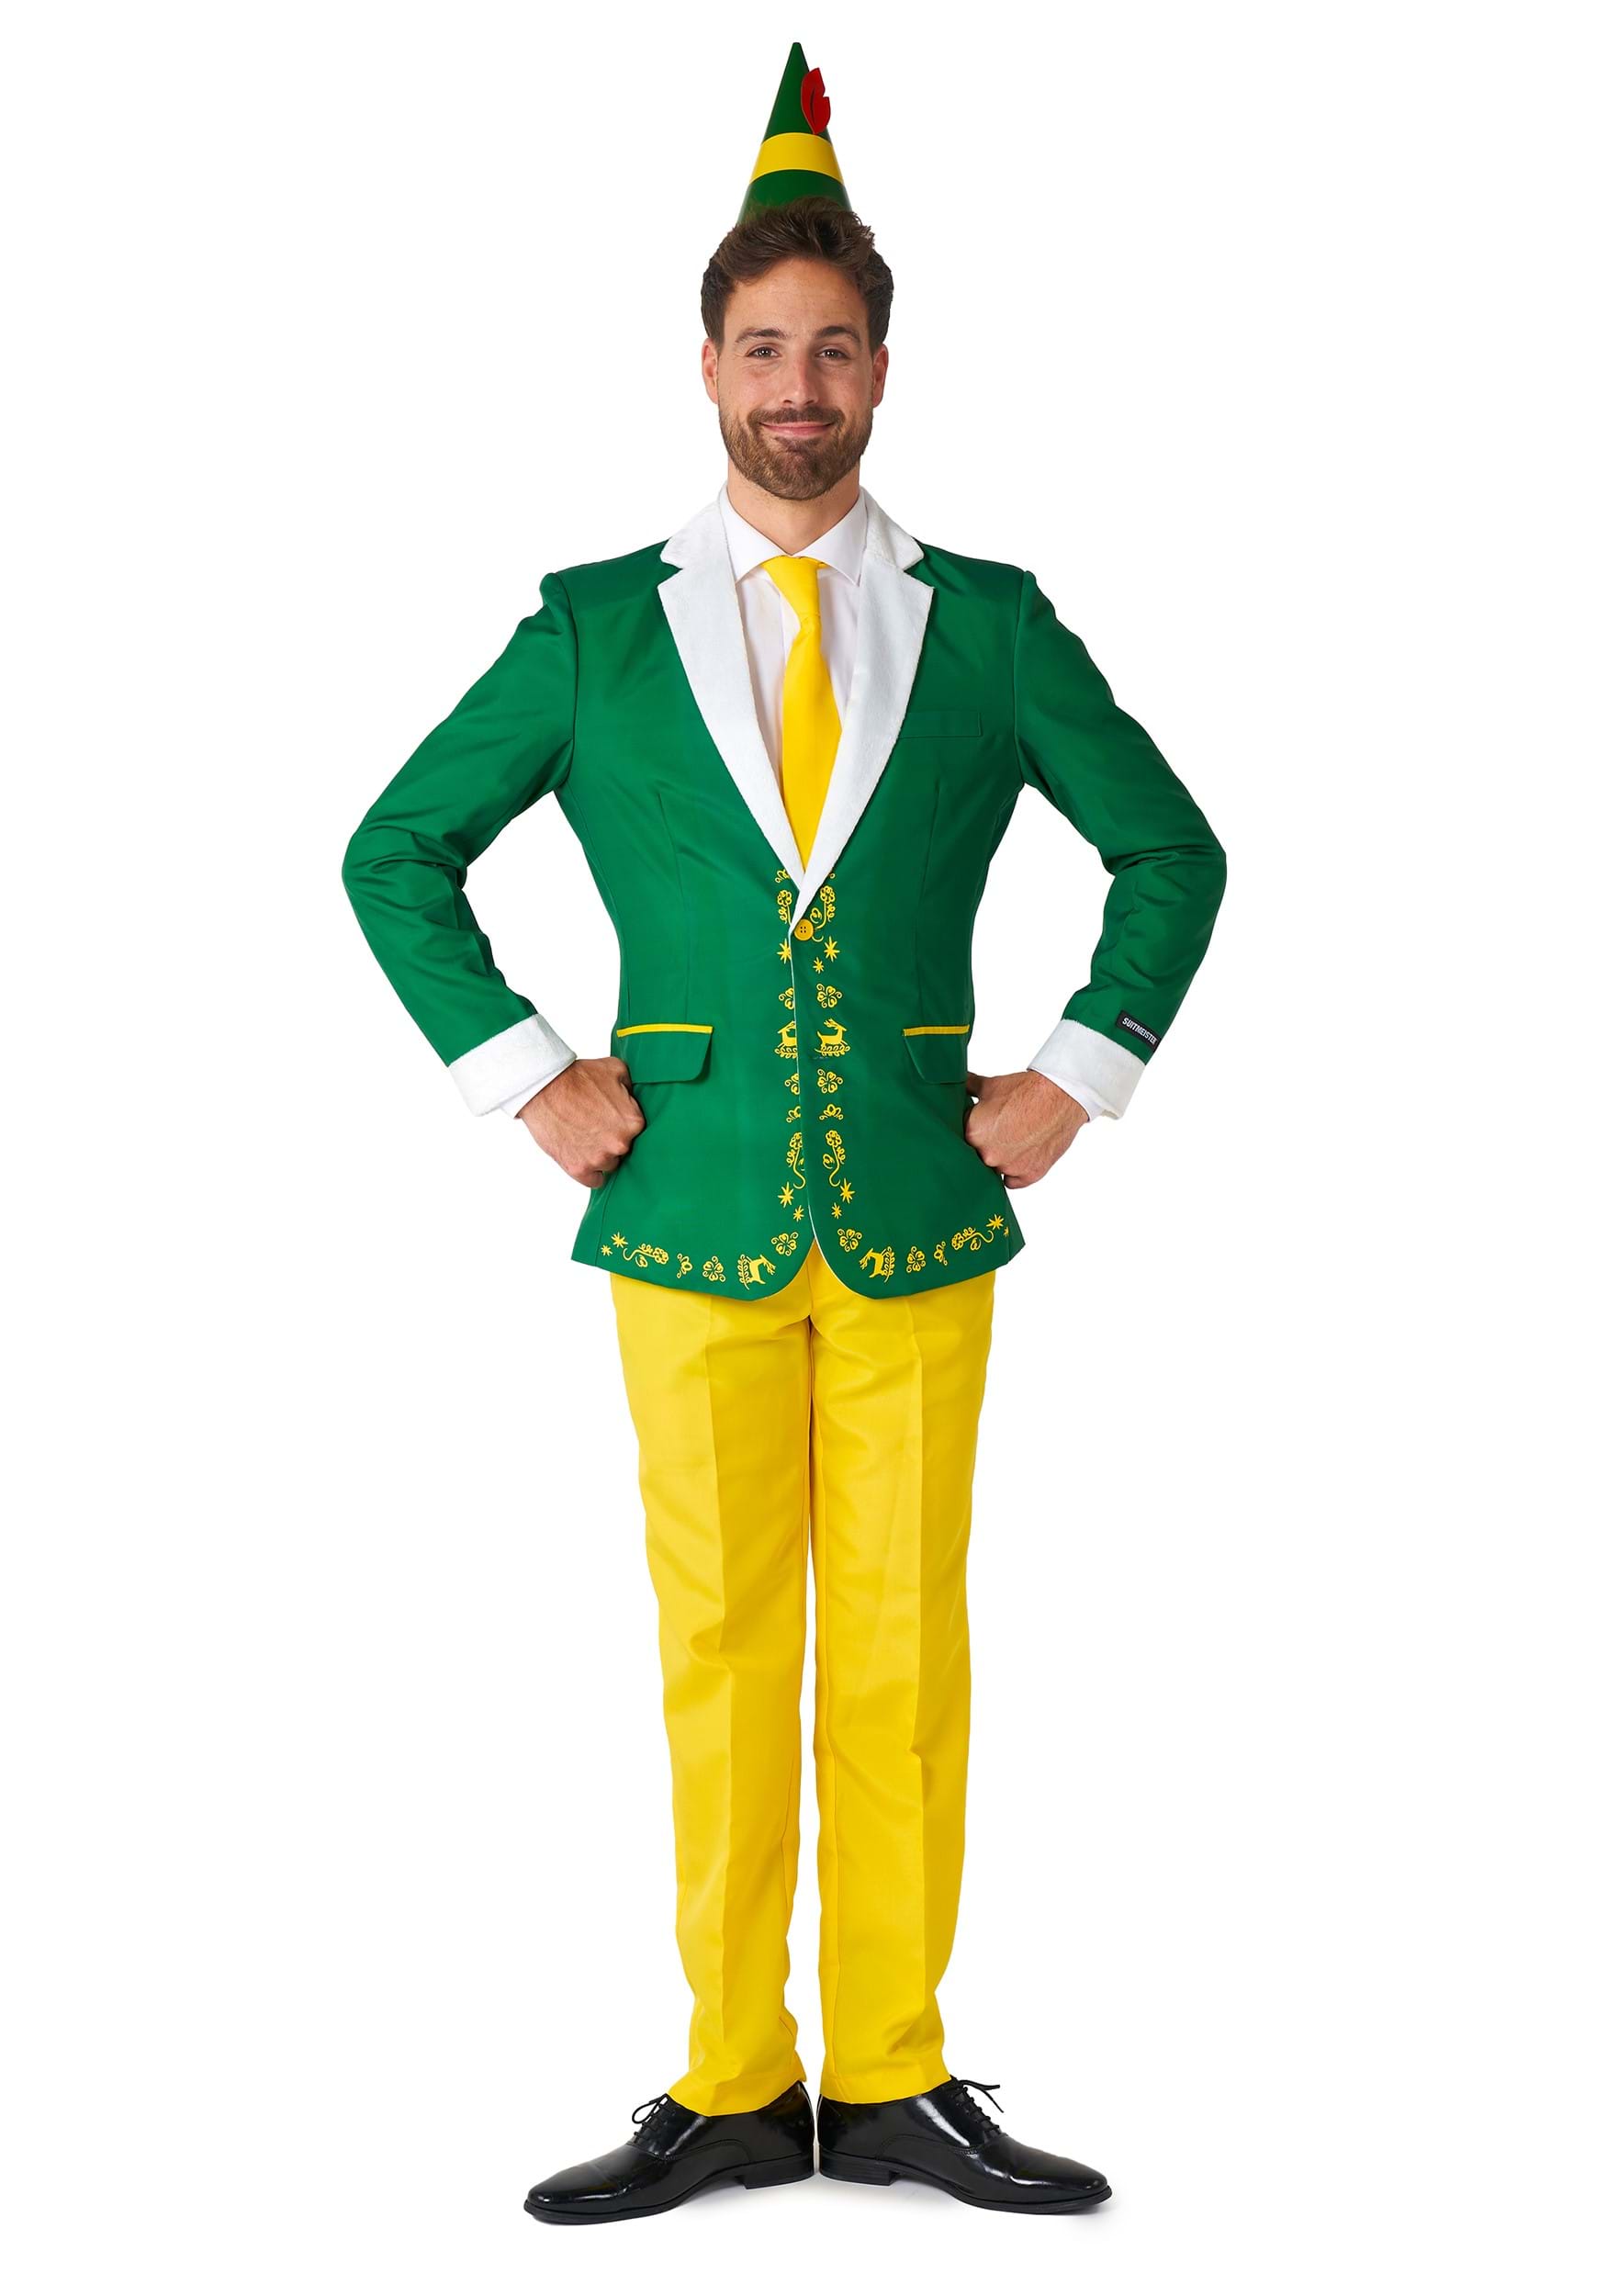 Image of Adult Buddy the Elf Suitmeister Suit ID OSOBAS-1032-M